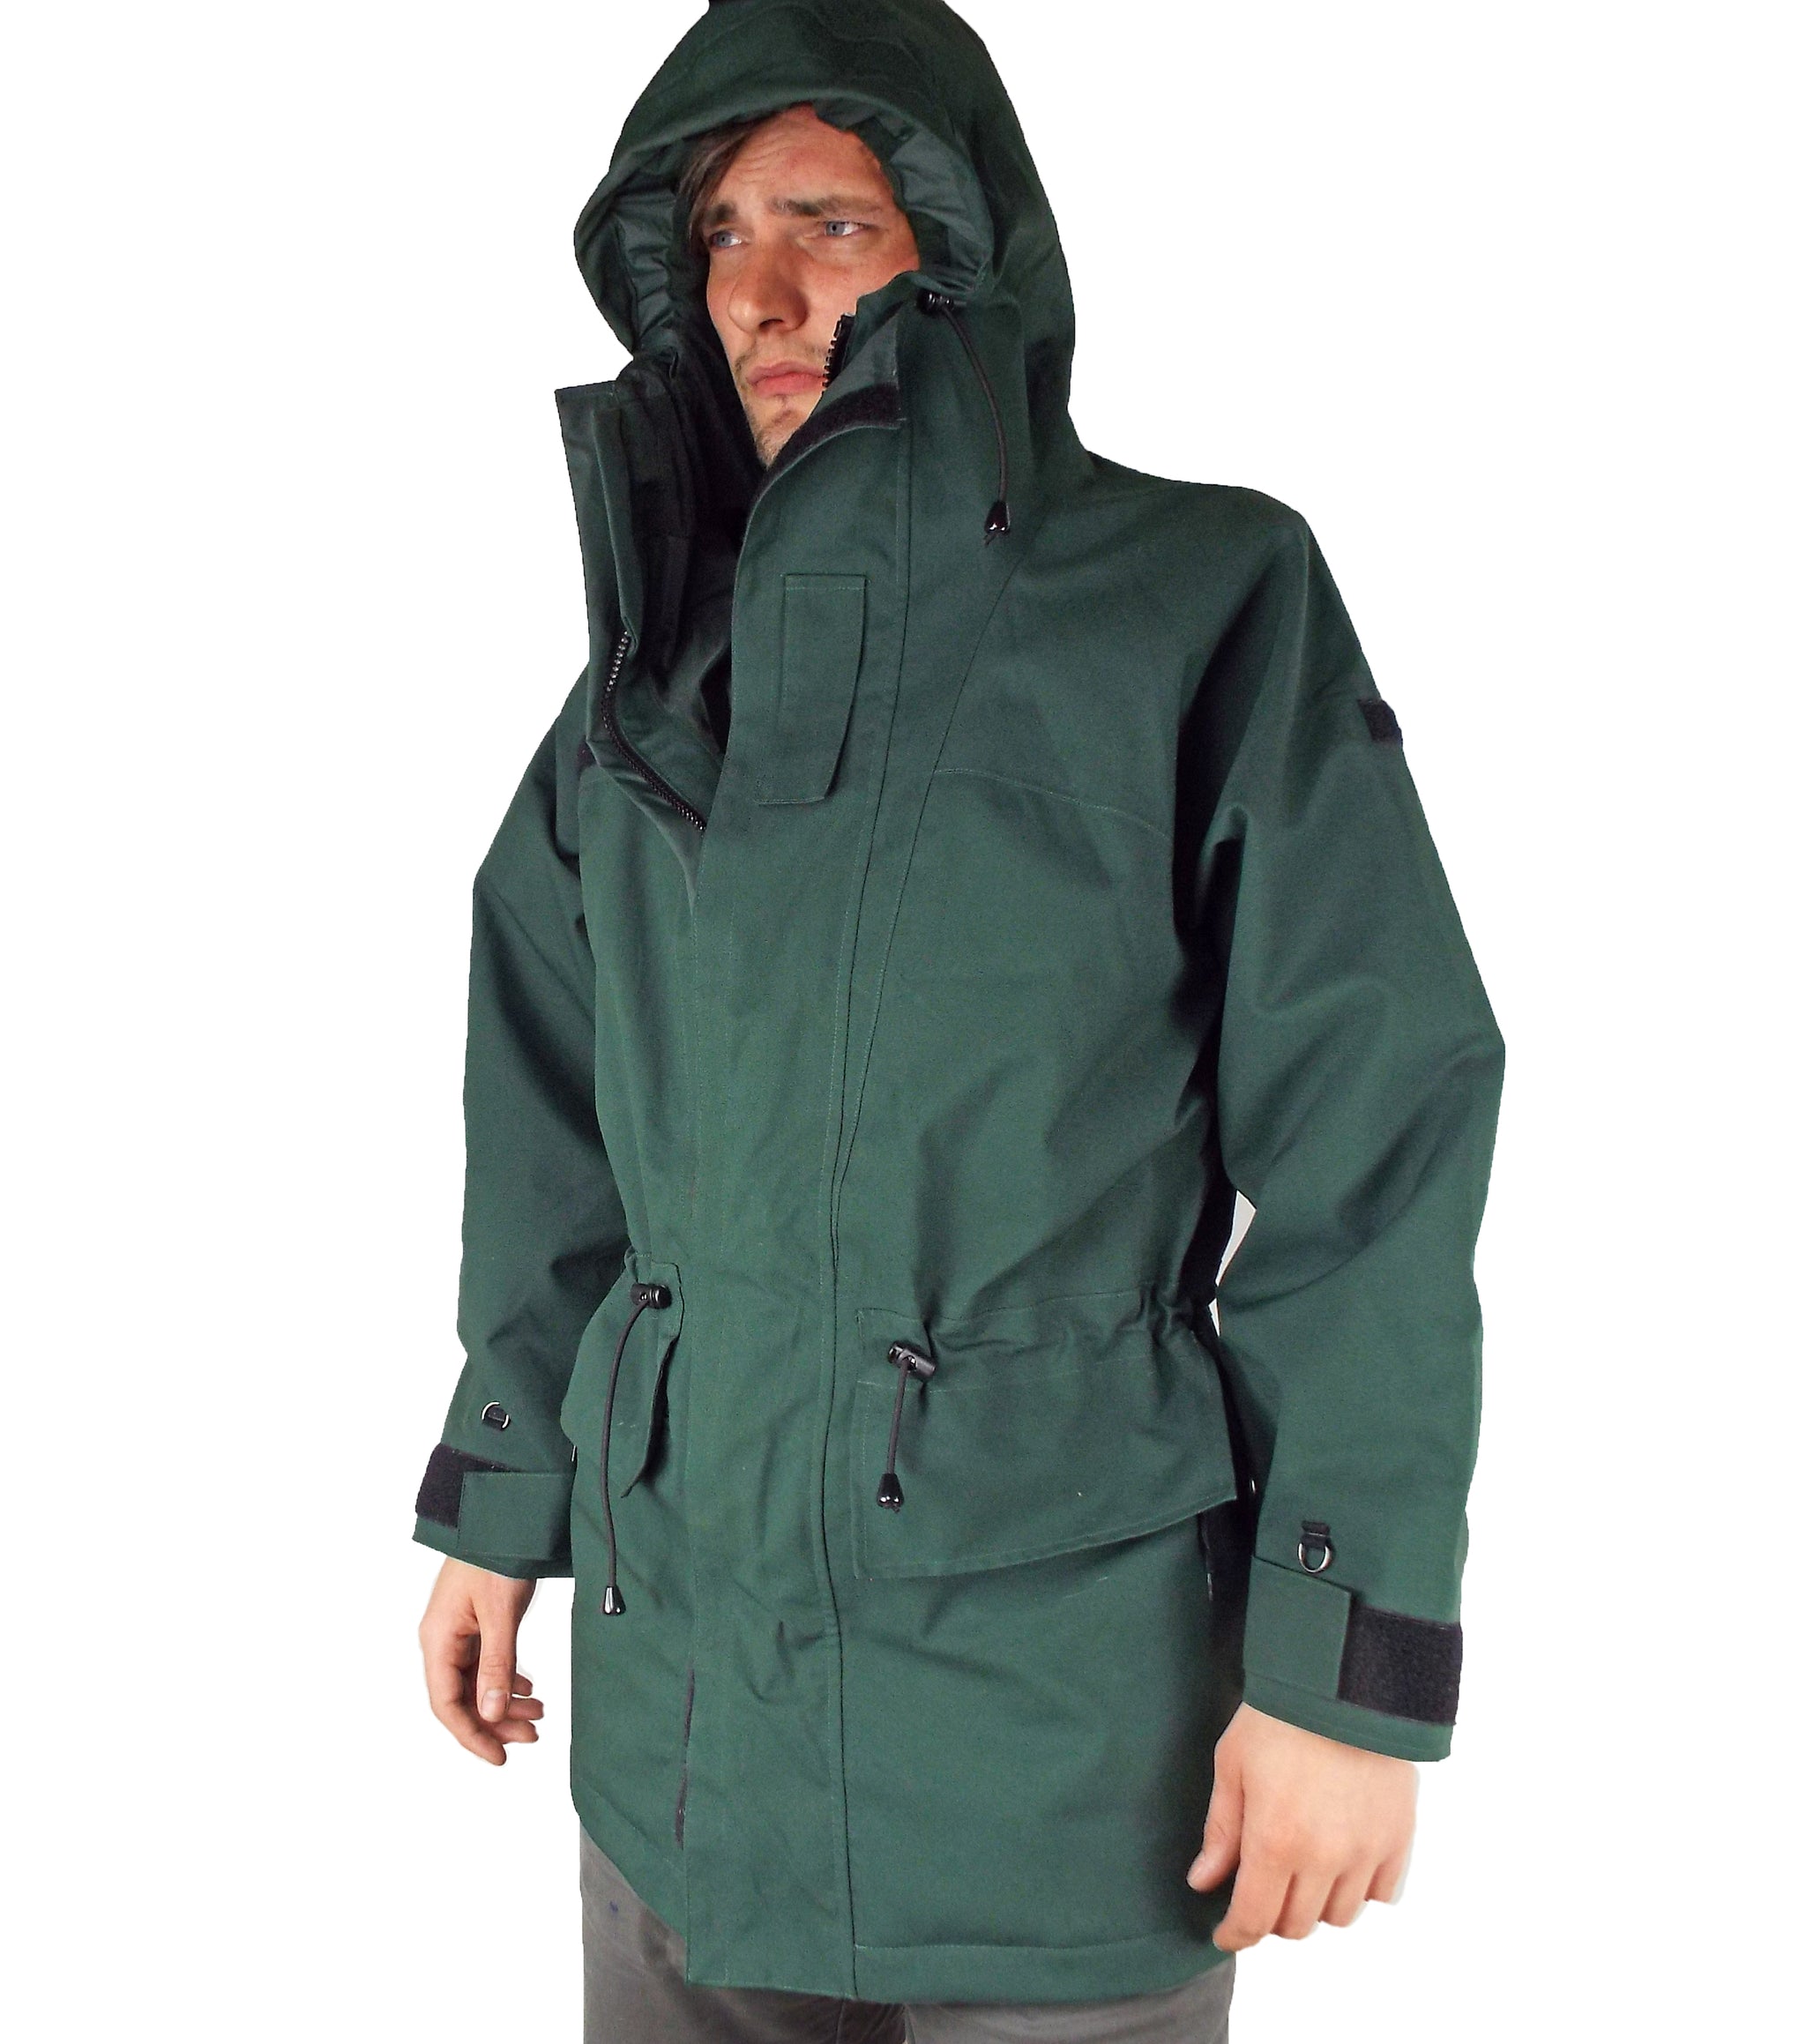 Dutch Army - Green Waterproof Wet Weather Parka - Super Grade Medium /  Short - to fit up to 40